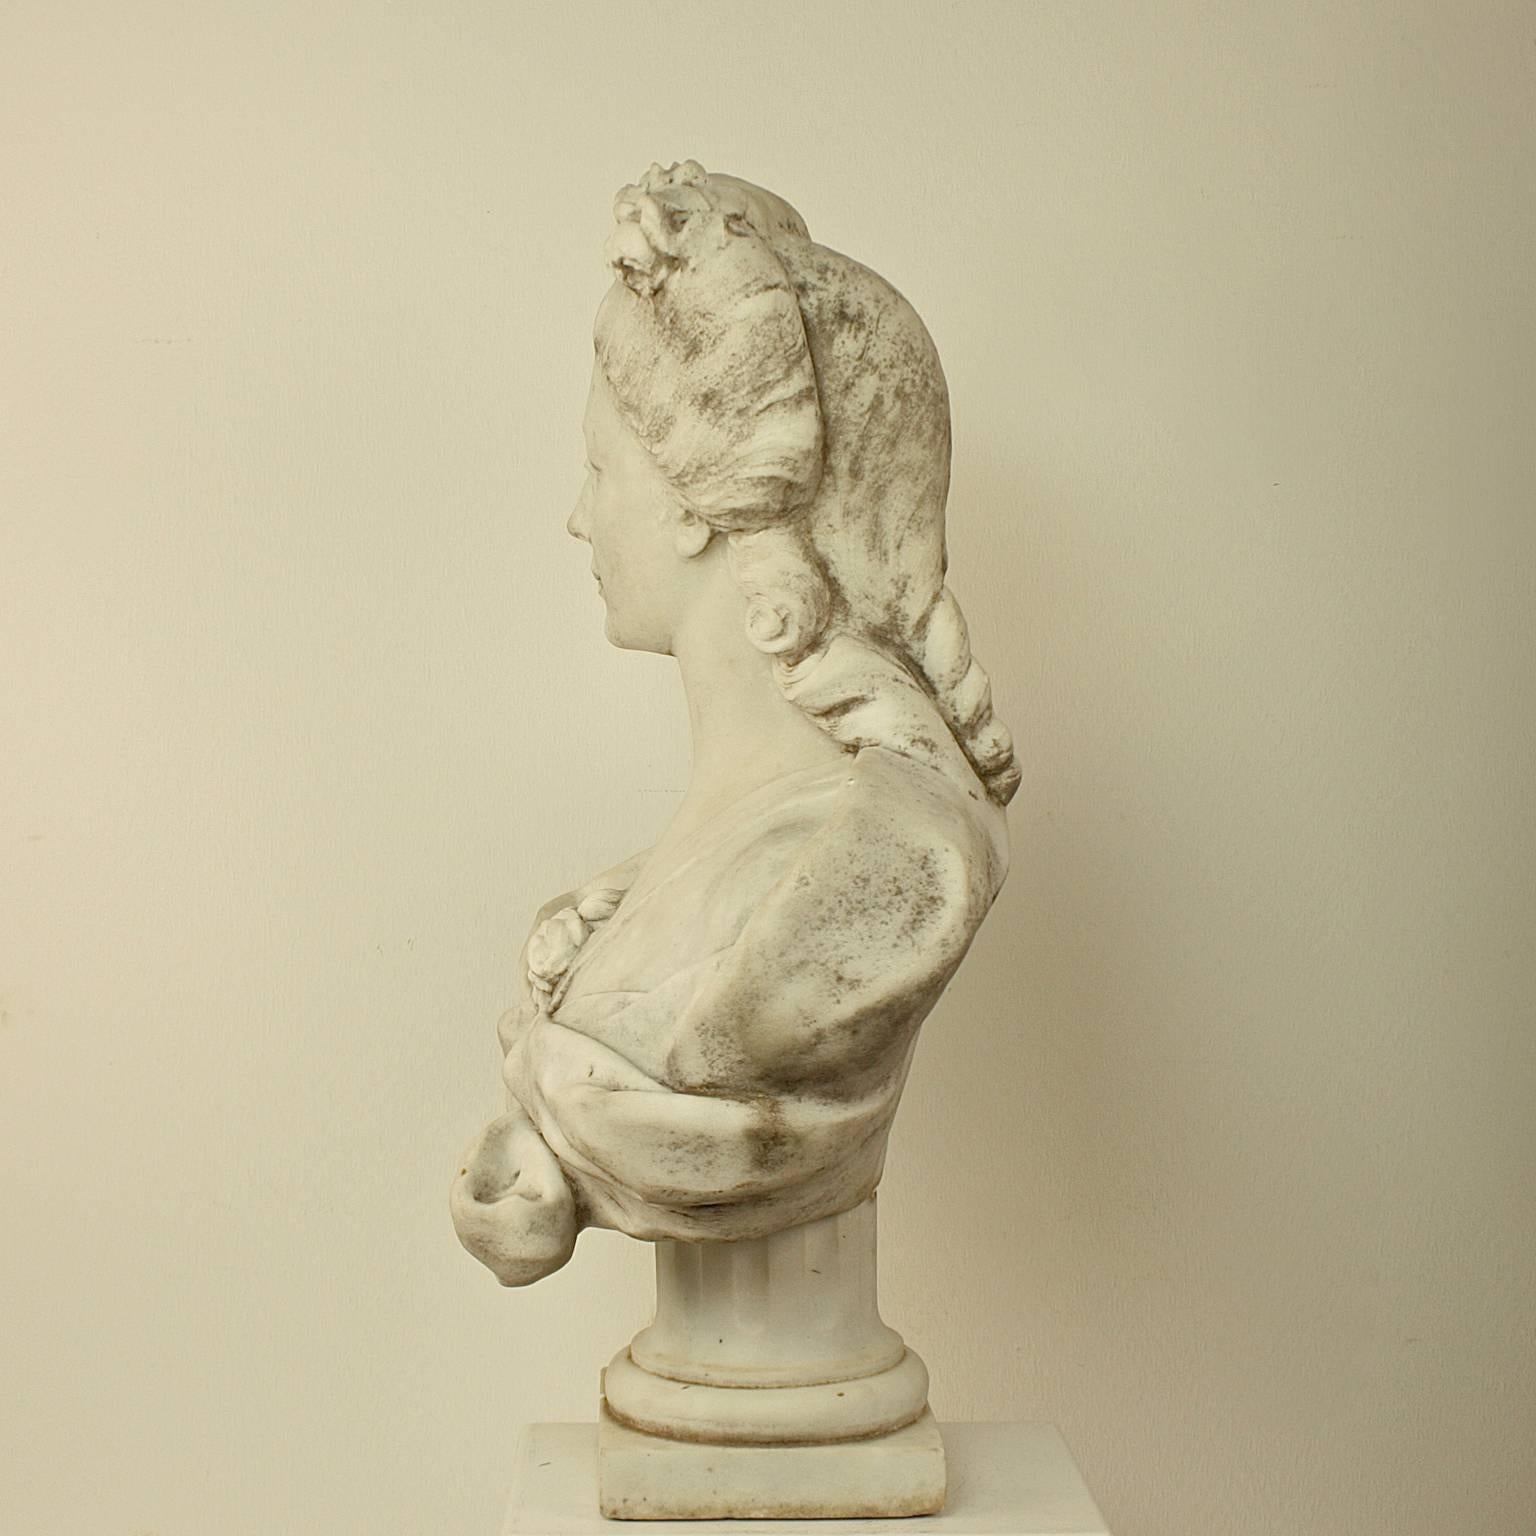 Carved 18th or 19th Century White Marble Bust of a Young Woman